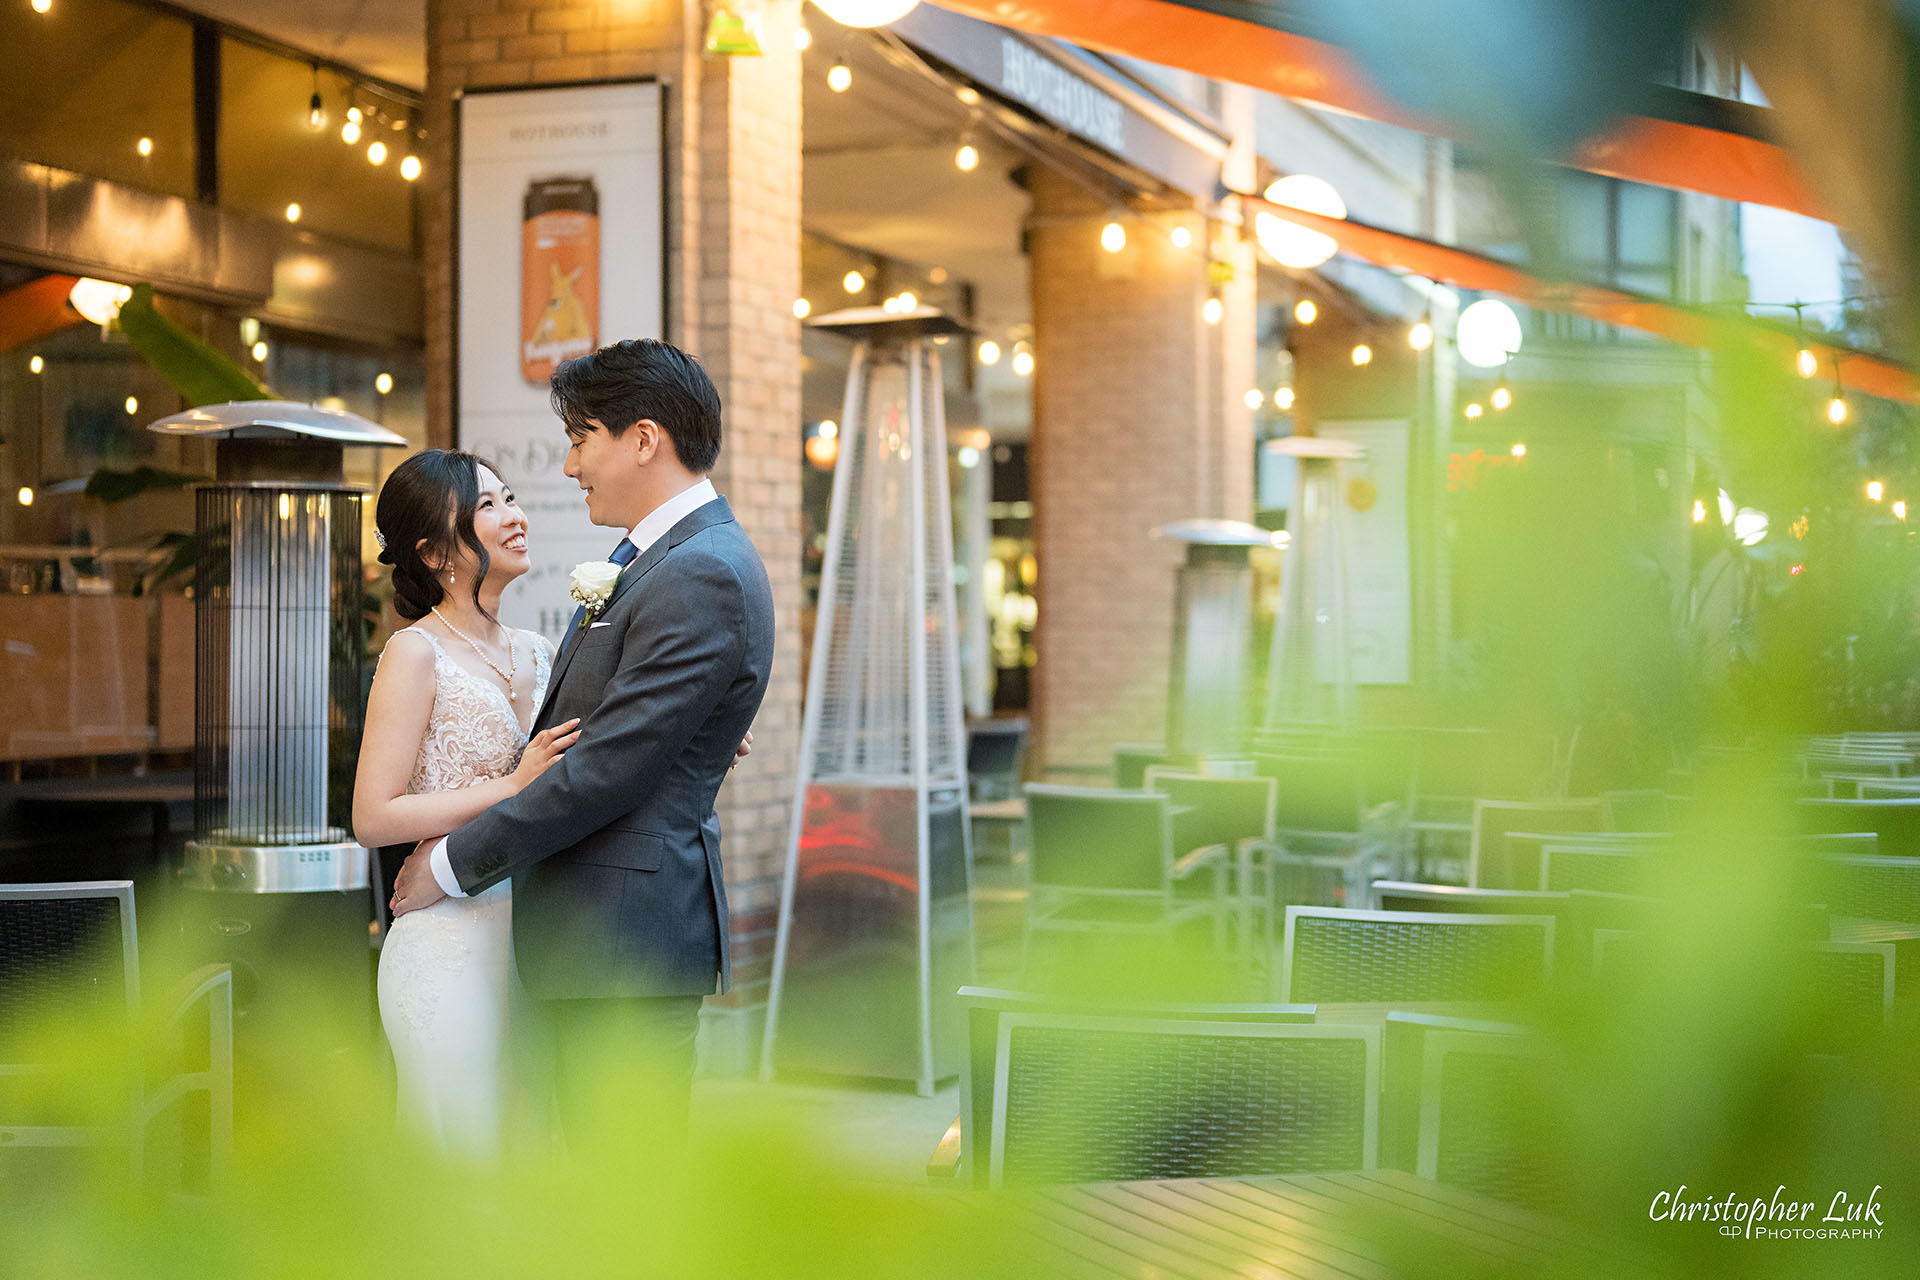 HotHouse Restaurant Wedding Main Entrance Exterior Patio Seating Bride Groom Twinkling String Lights Hugging Holding Each Other